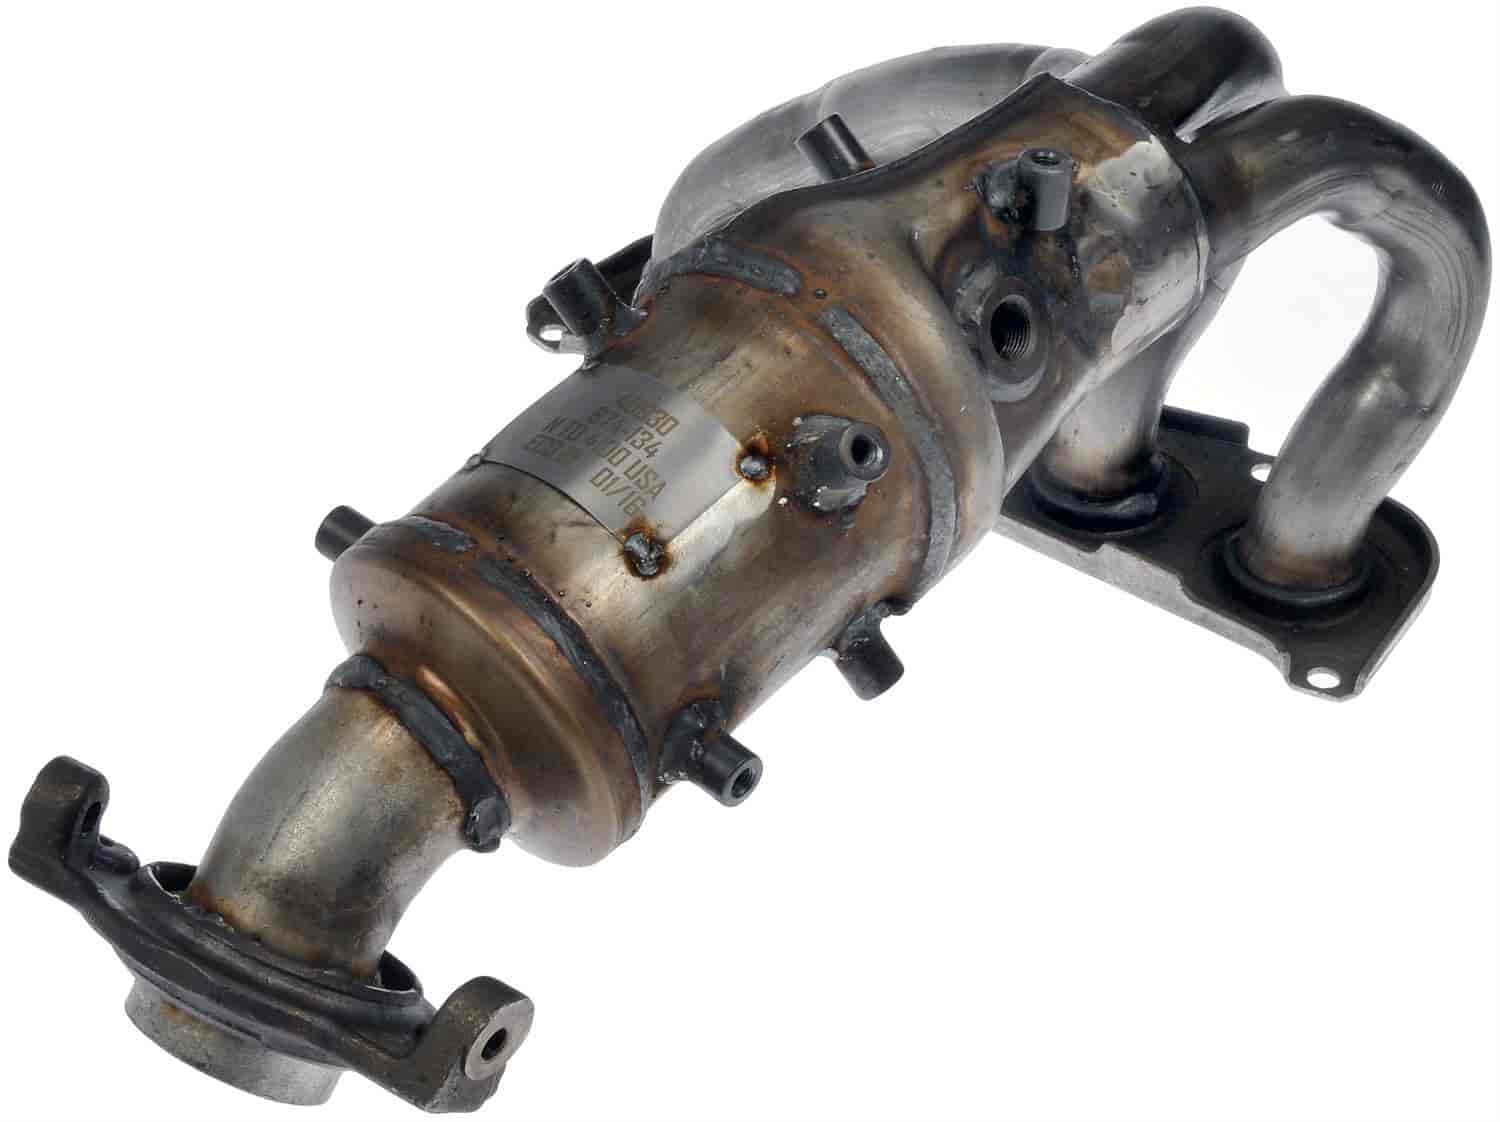 Manifold Converter Not Carb Compliant Not For Legal Sale In NY CA